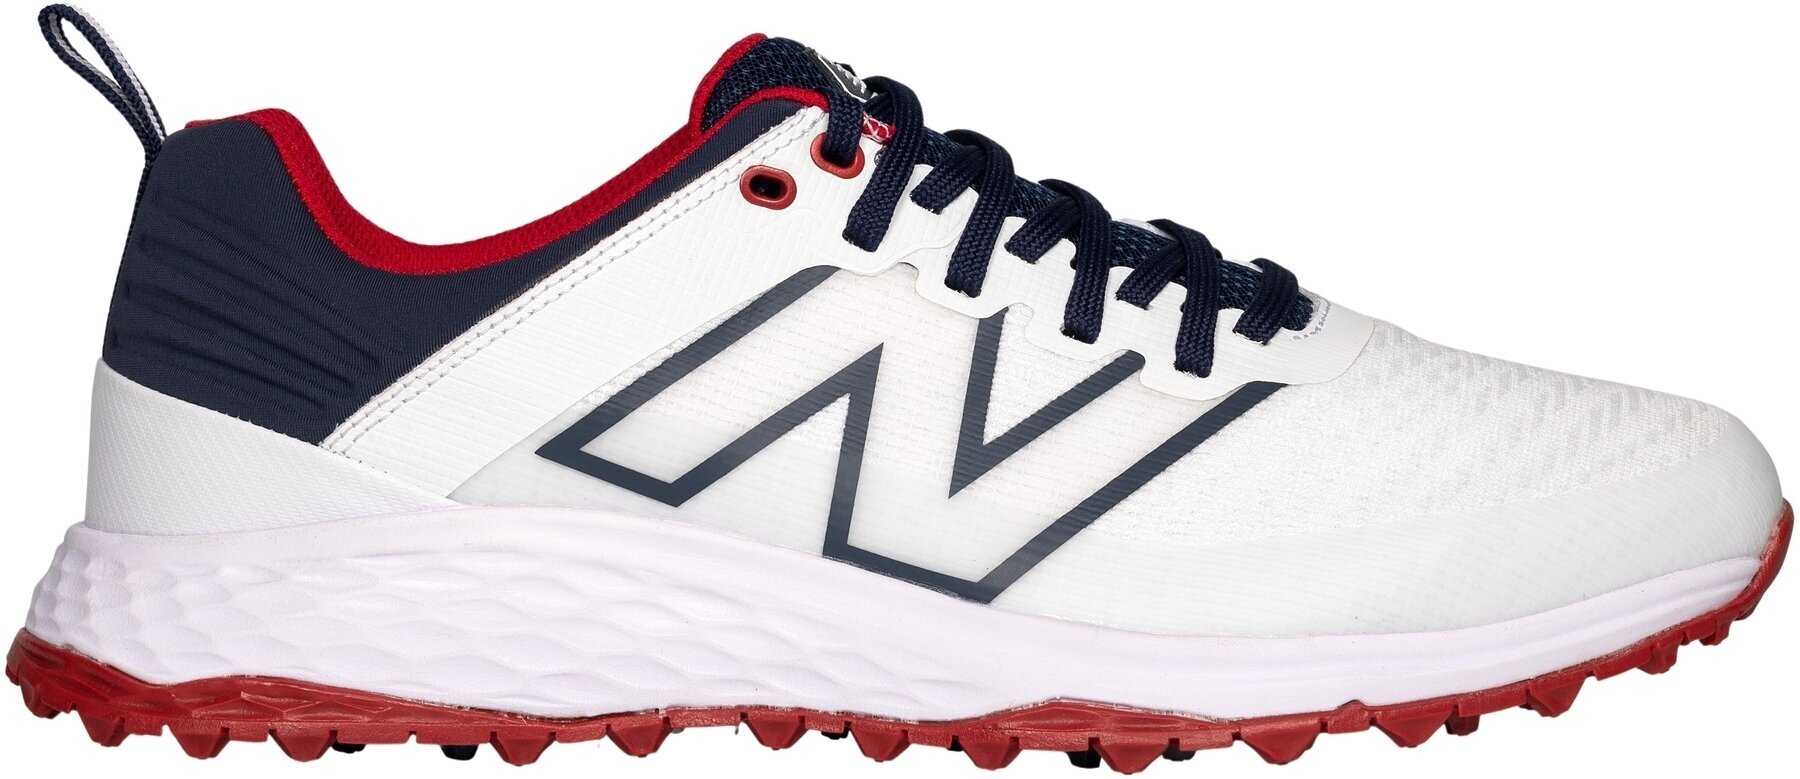 Men's golf shoes New Balance Contend Mens Golf Shoes White/Navy 41,5